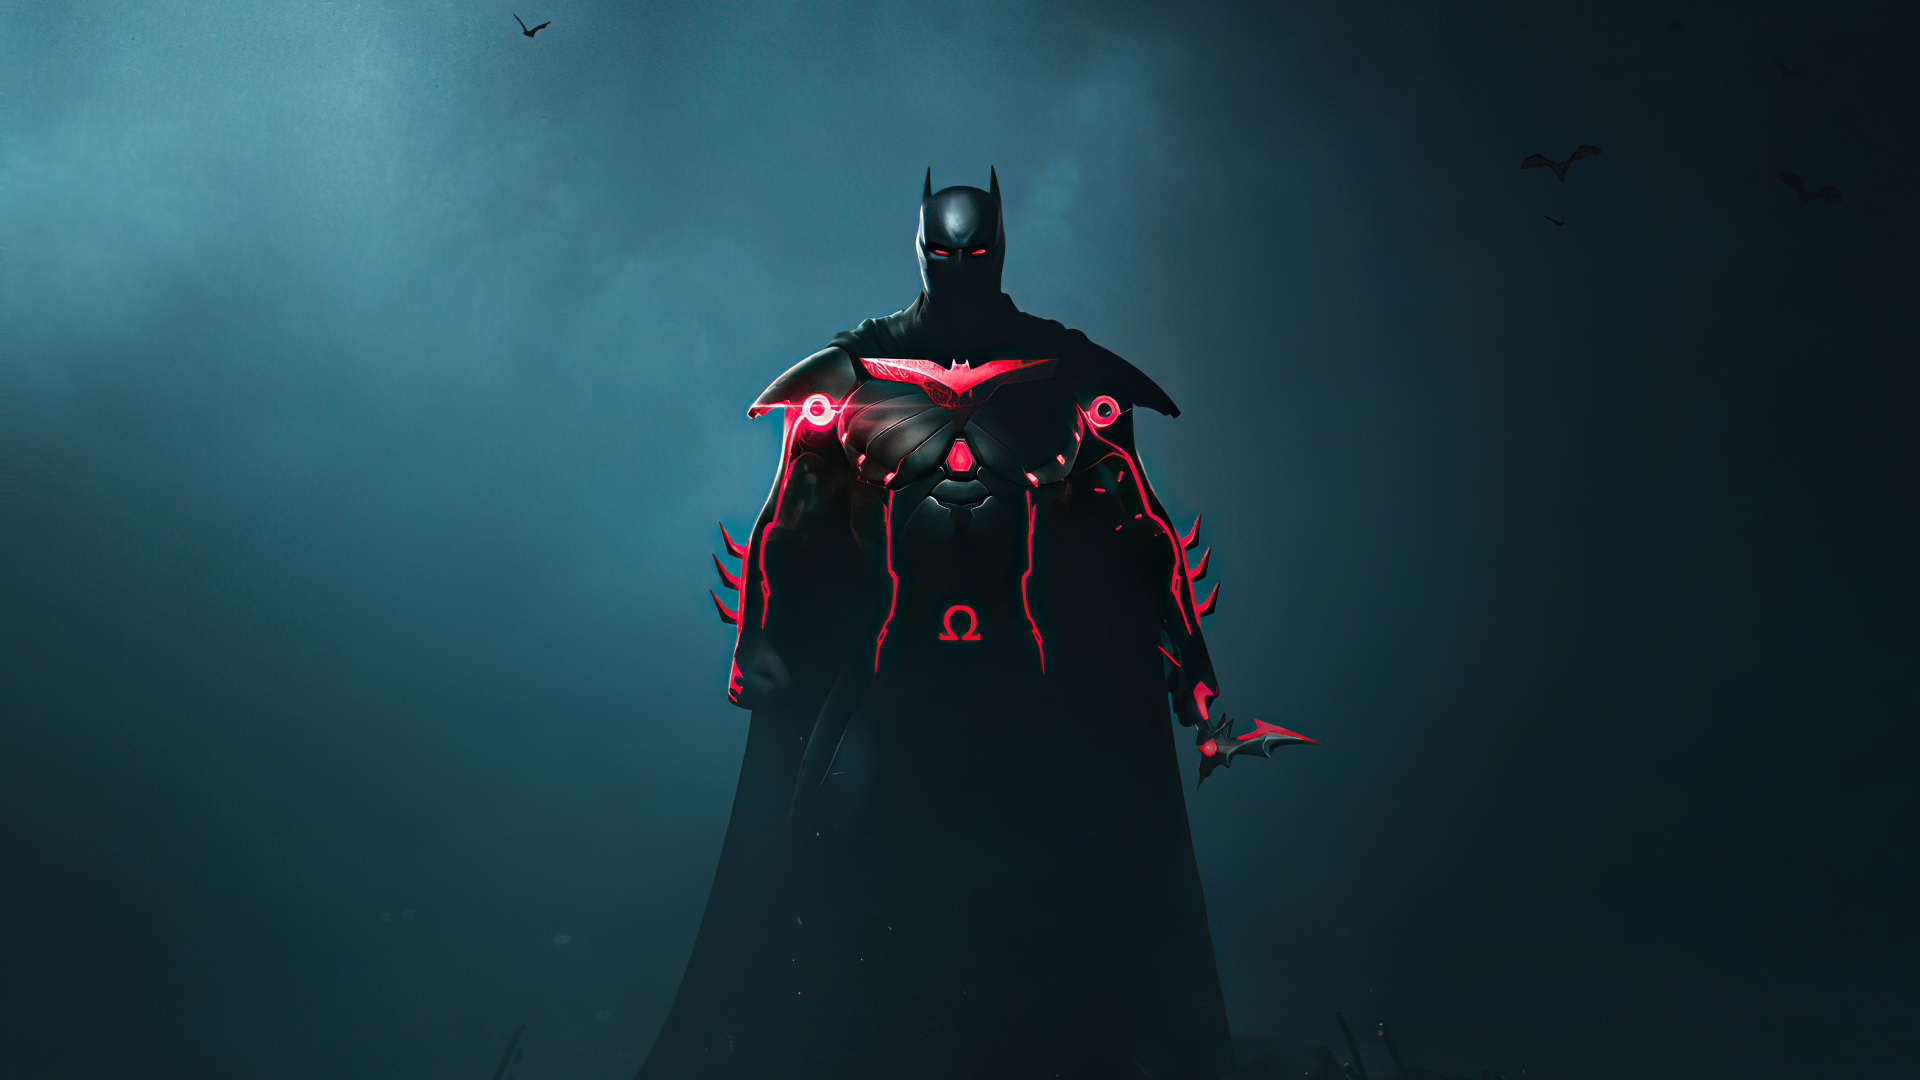 234+ Batman HD Wallpapers in Ipad Air, 2048x2048 Resolution Images - Page 4